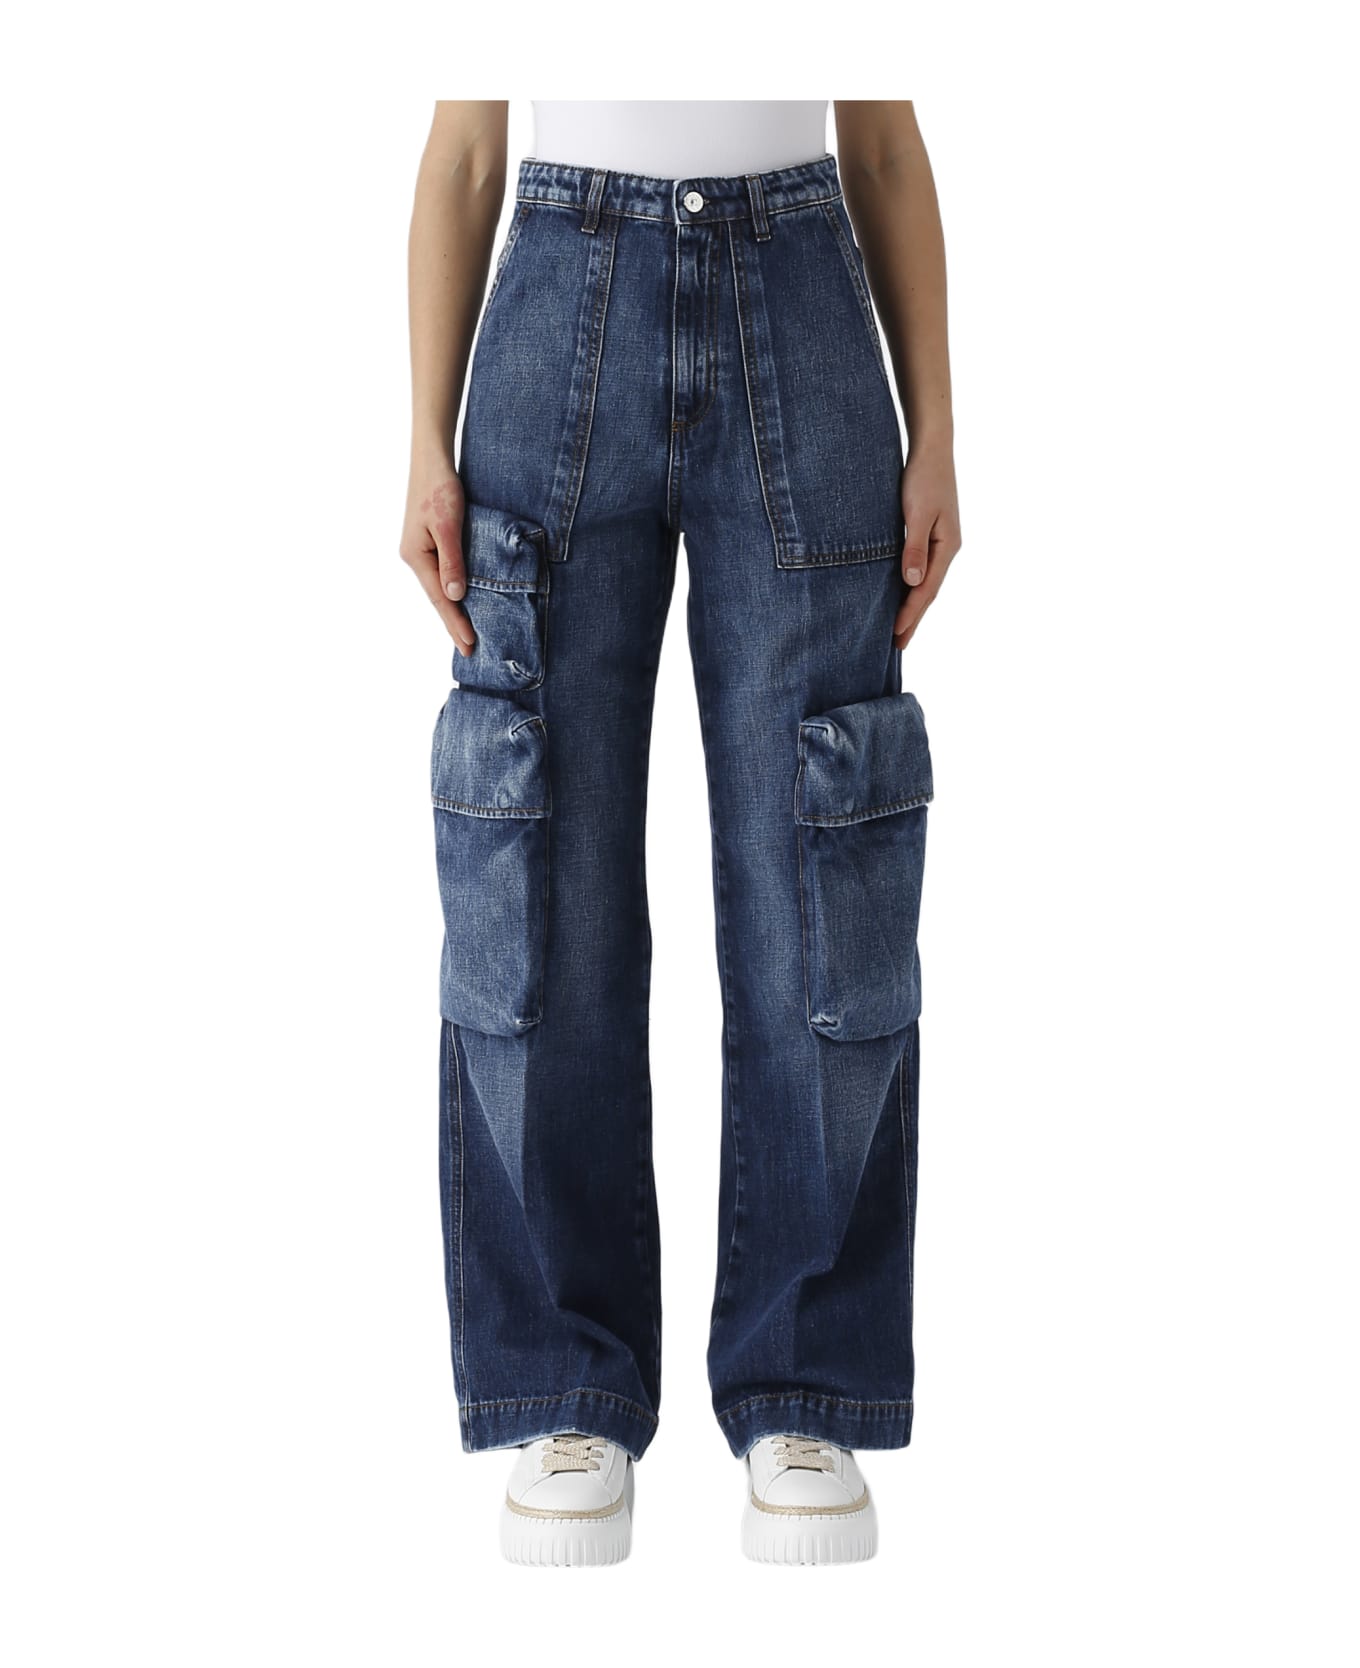 Nine in the Morning Madrid Jeans Jeans - DENIM SCURO